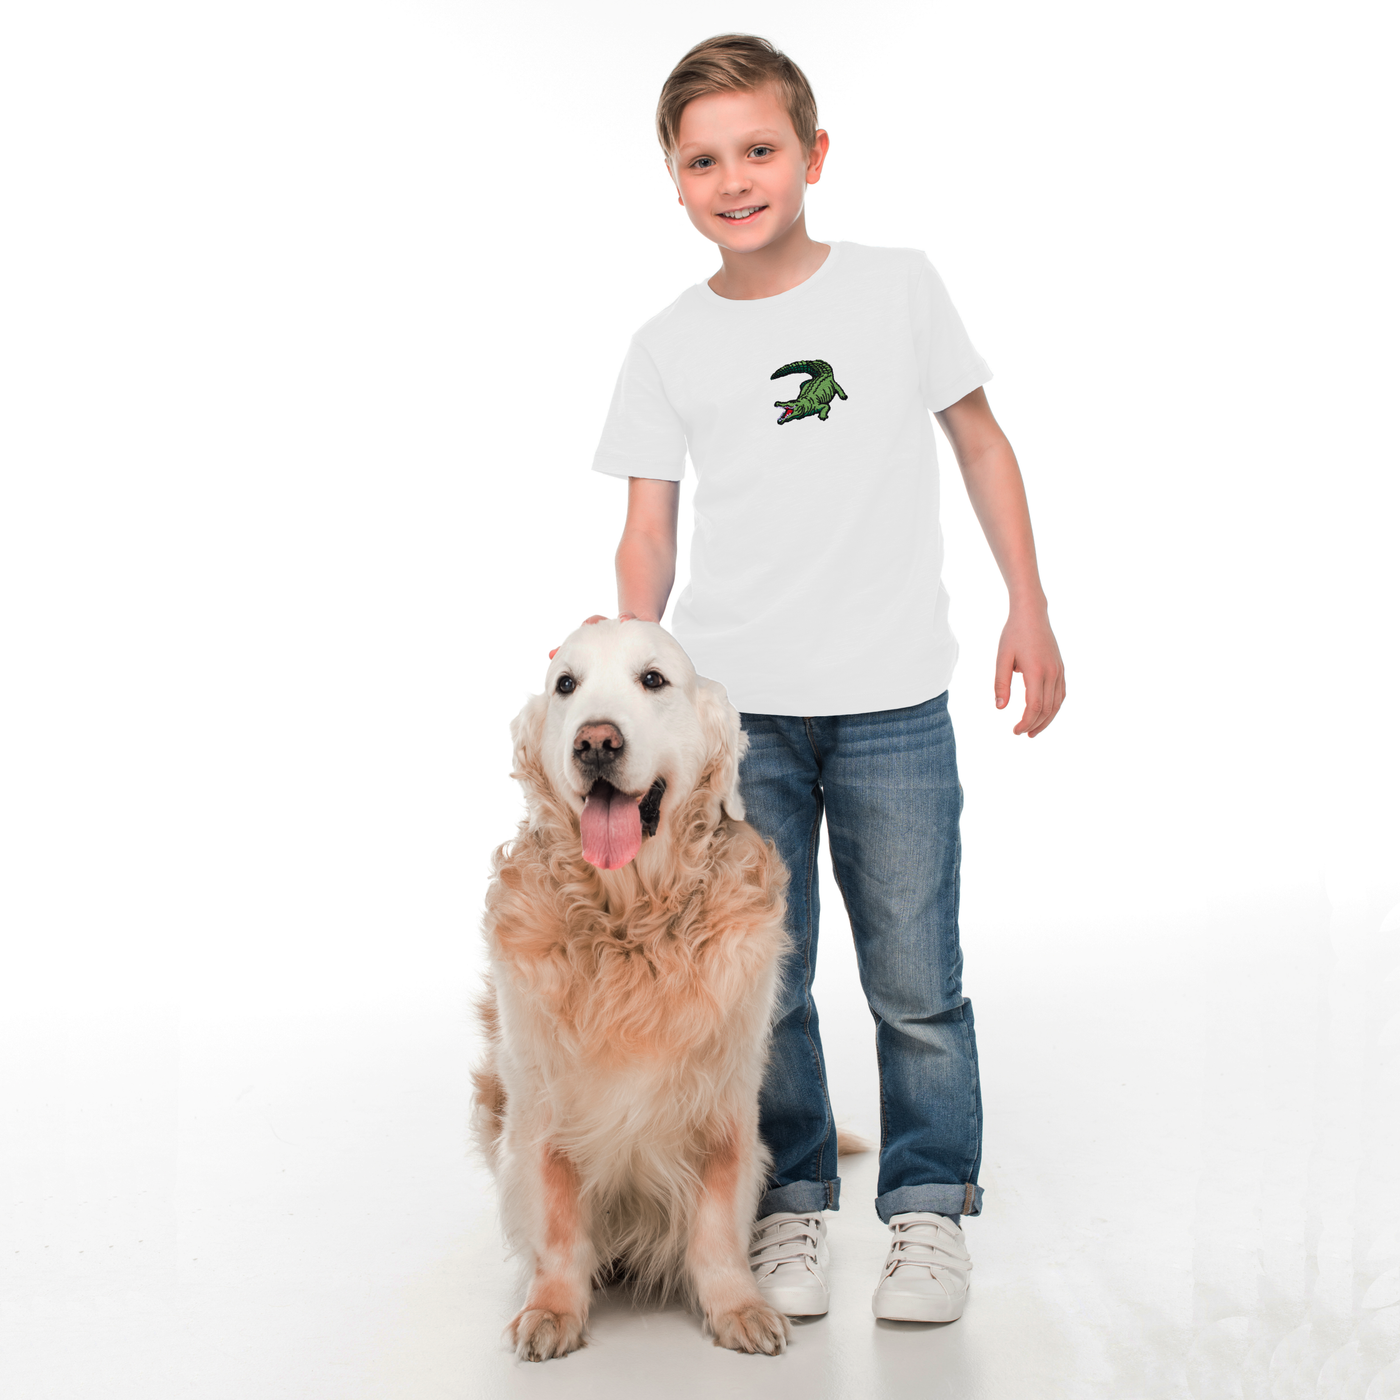 Bobby's Planet Kids Embroidered Saltwater Crocodile T-Shirt from Australia Down Under Animals Collection in White Color#color_white